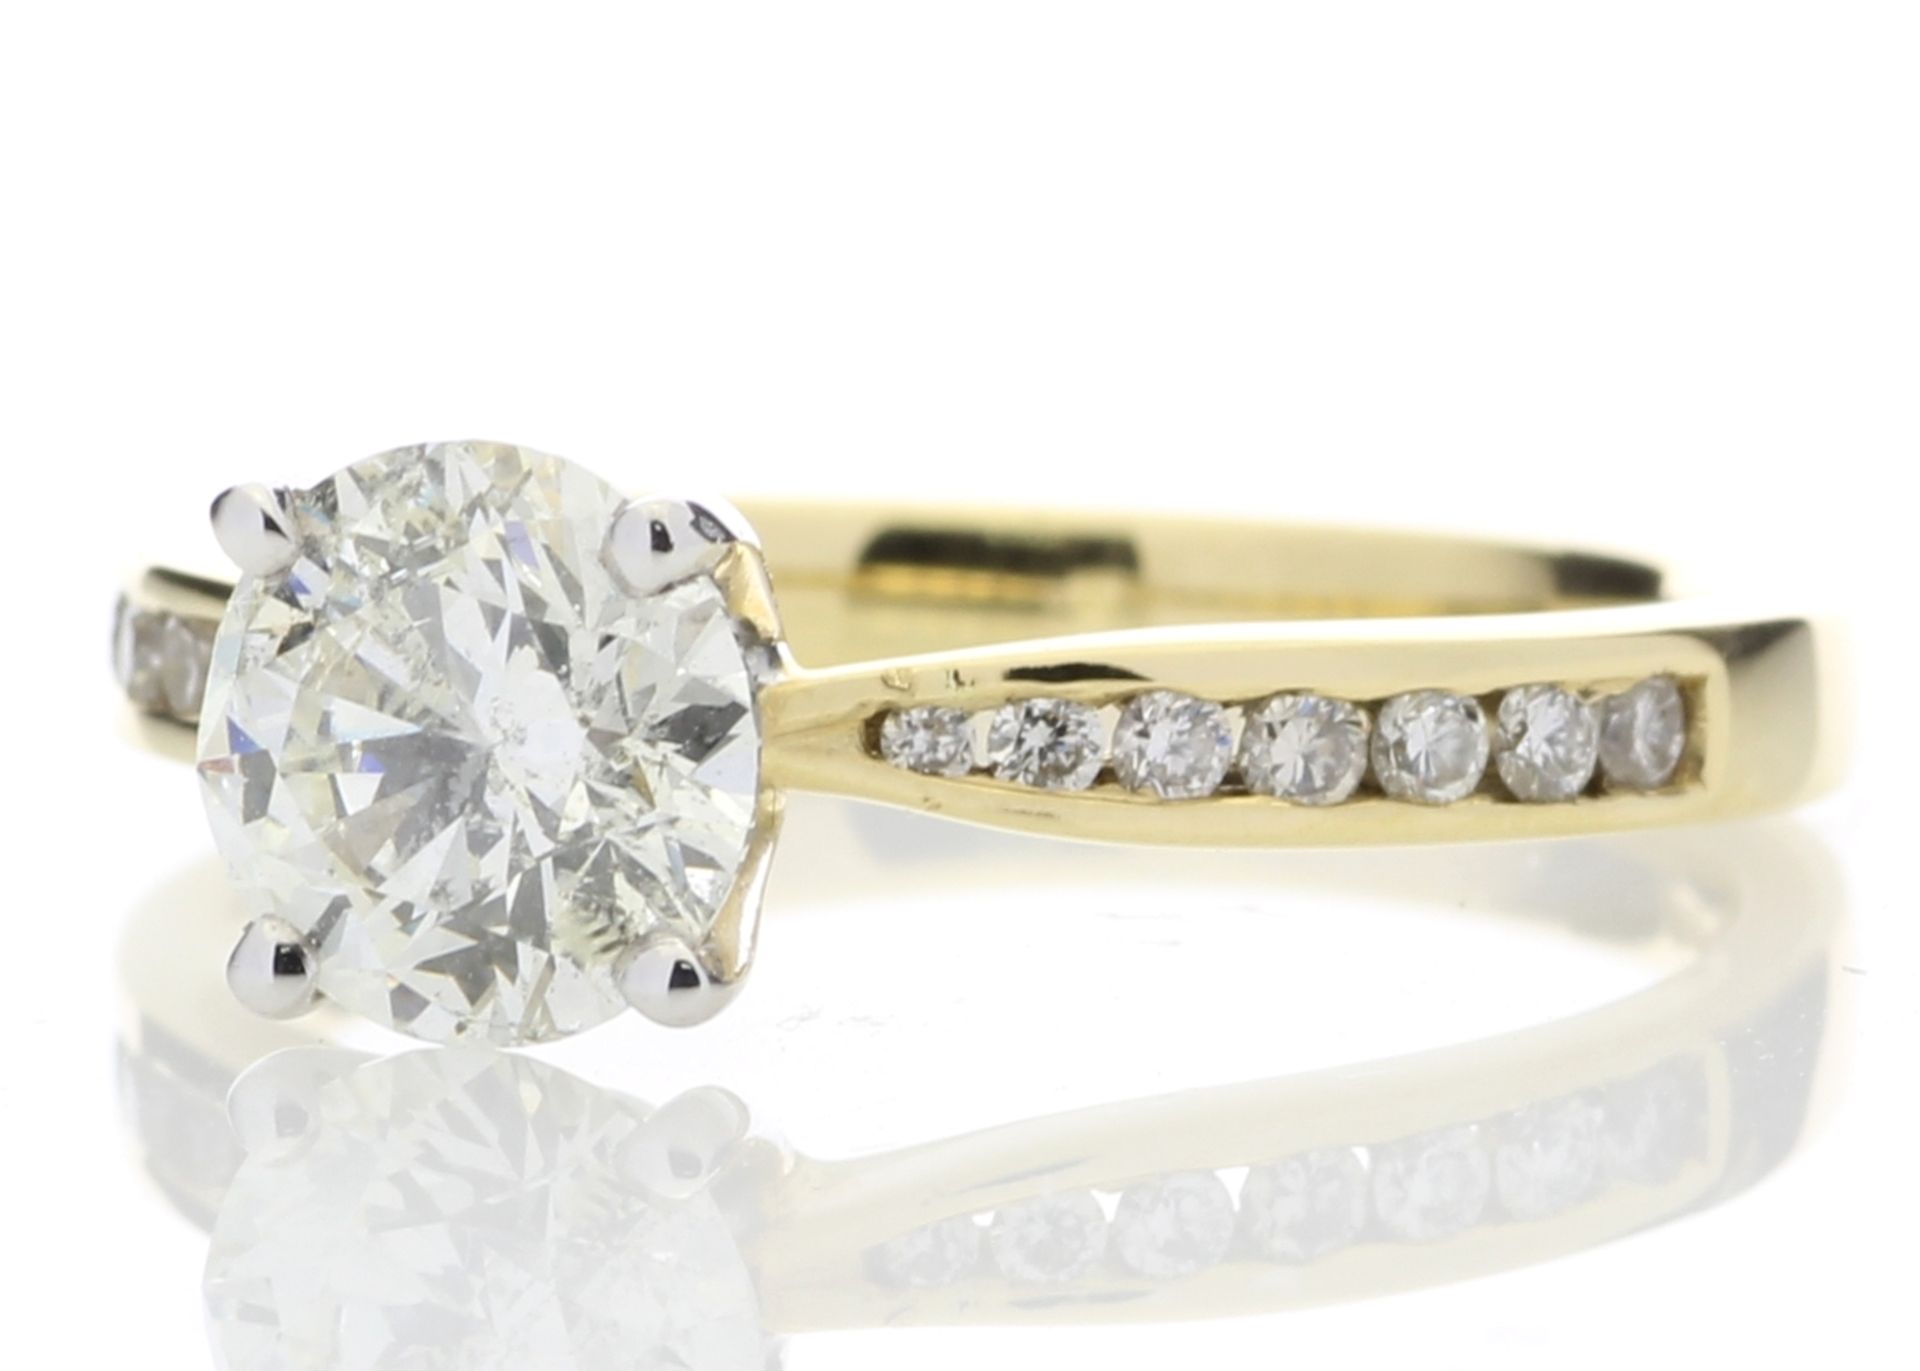 18ct Yellow Gold Diamond Ring With Stone Set Shoulders 1.28 Carats - Valued By IDI £21,775.00 - - Image 2 of 5